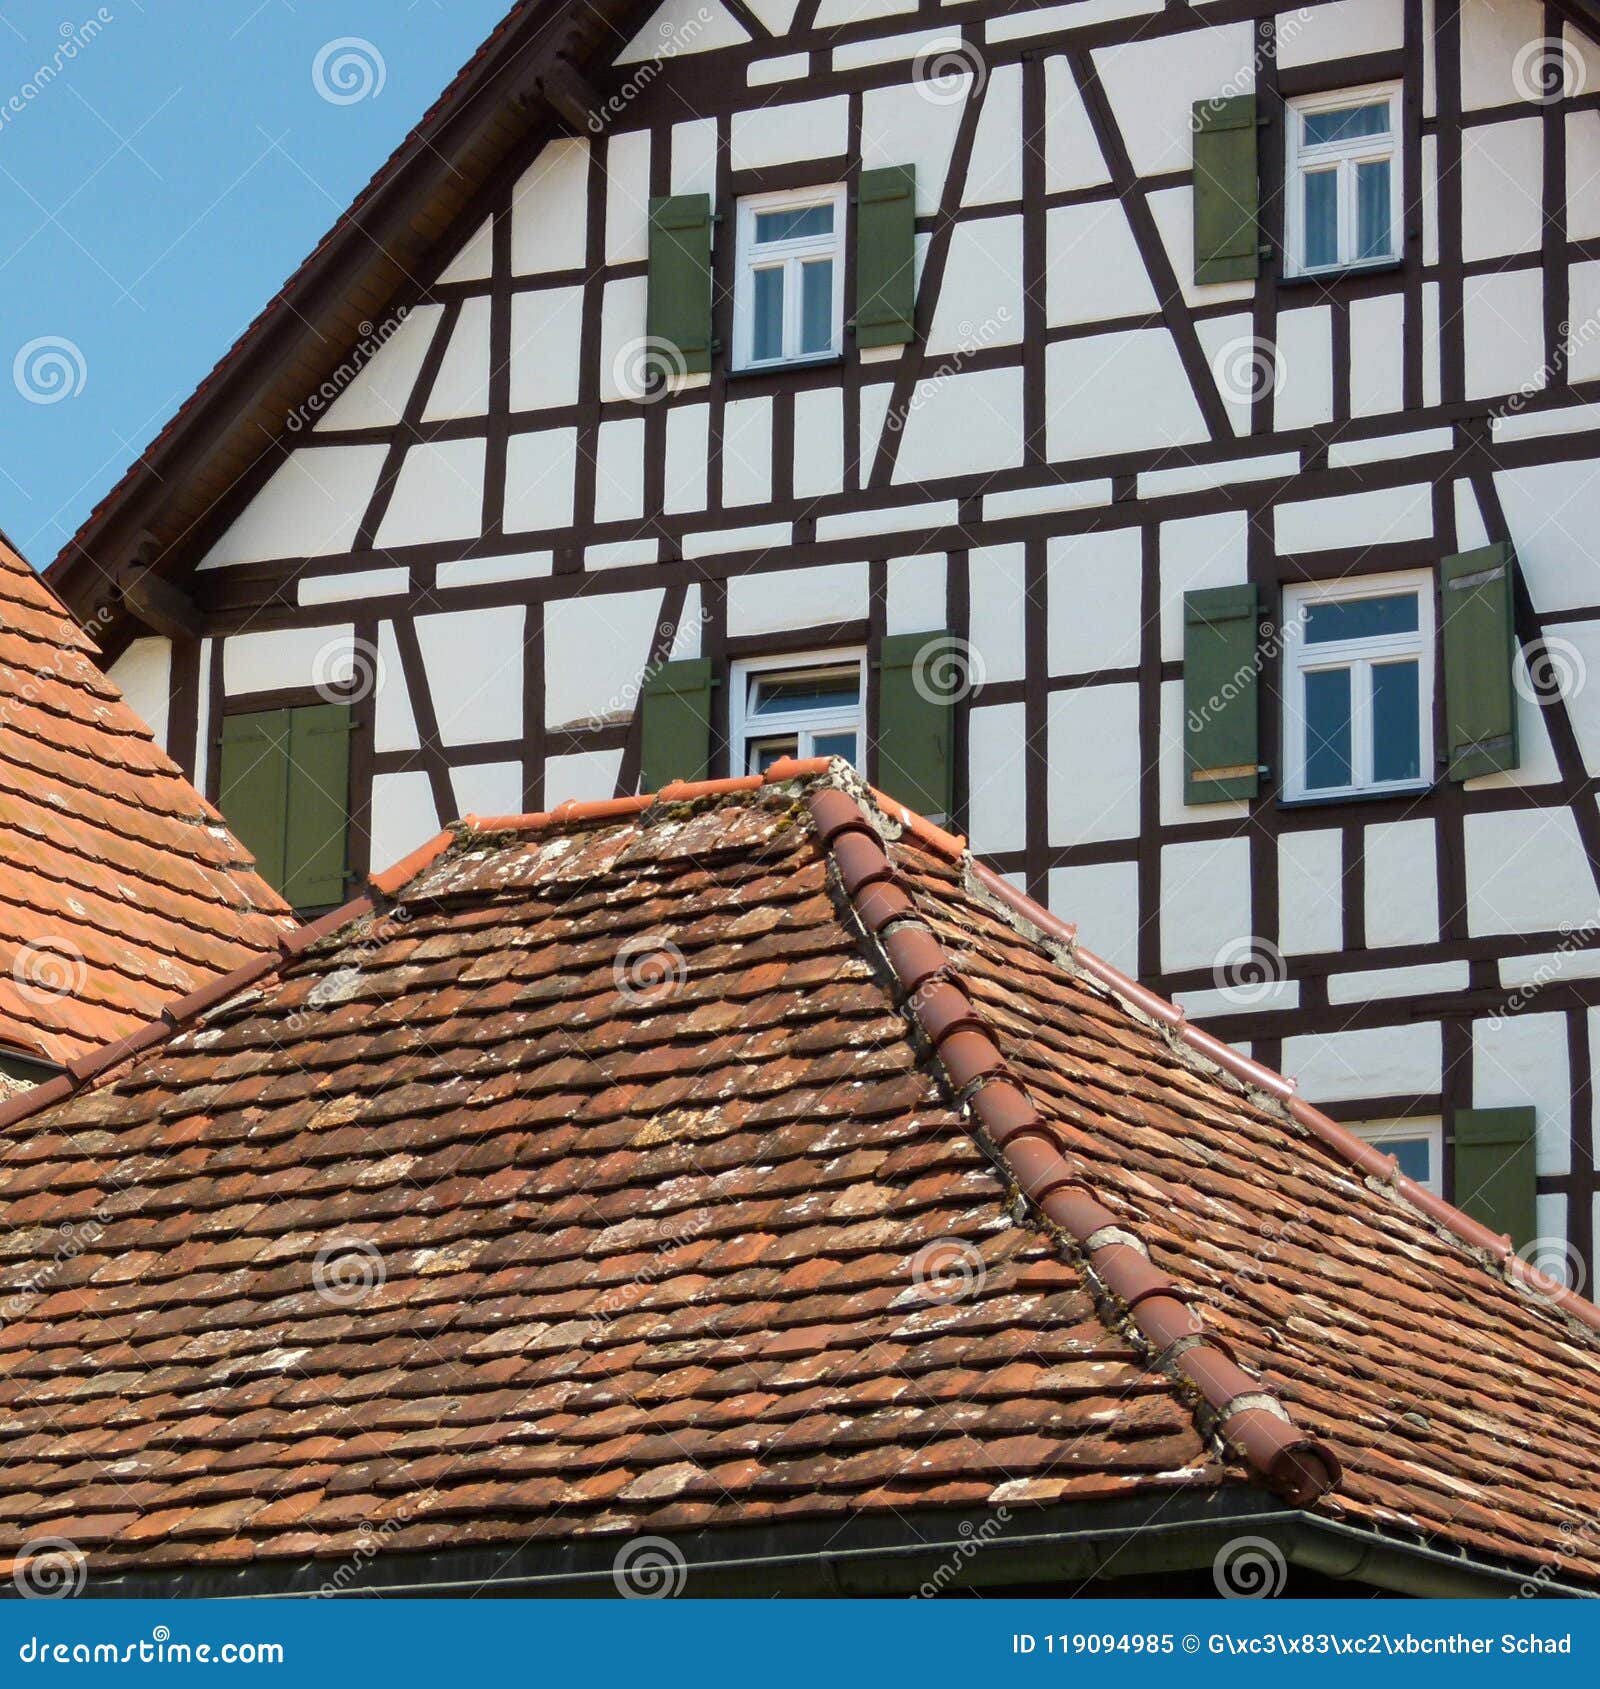 Ancient Roof Tiles in Front of Truss FaÃ§ade Stock Image - Image of